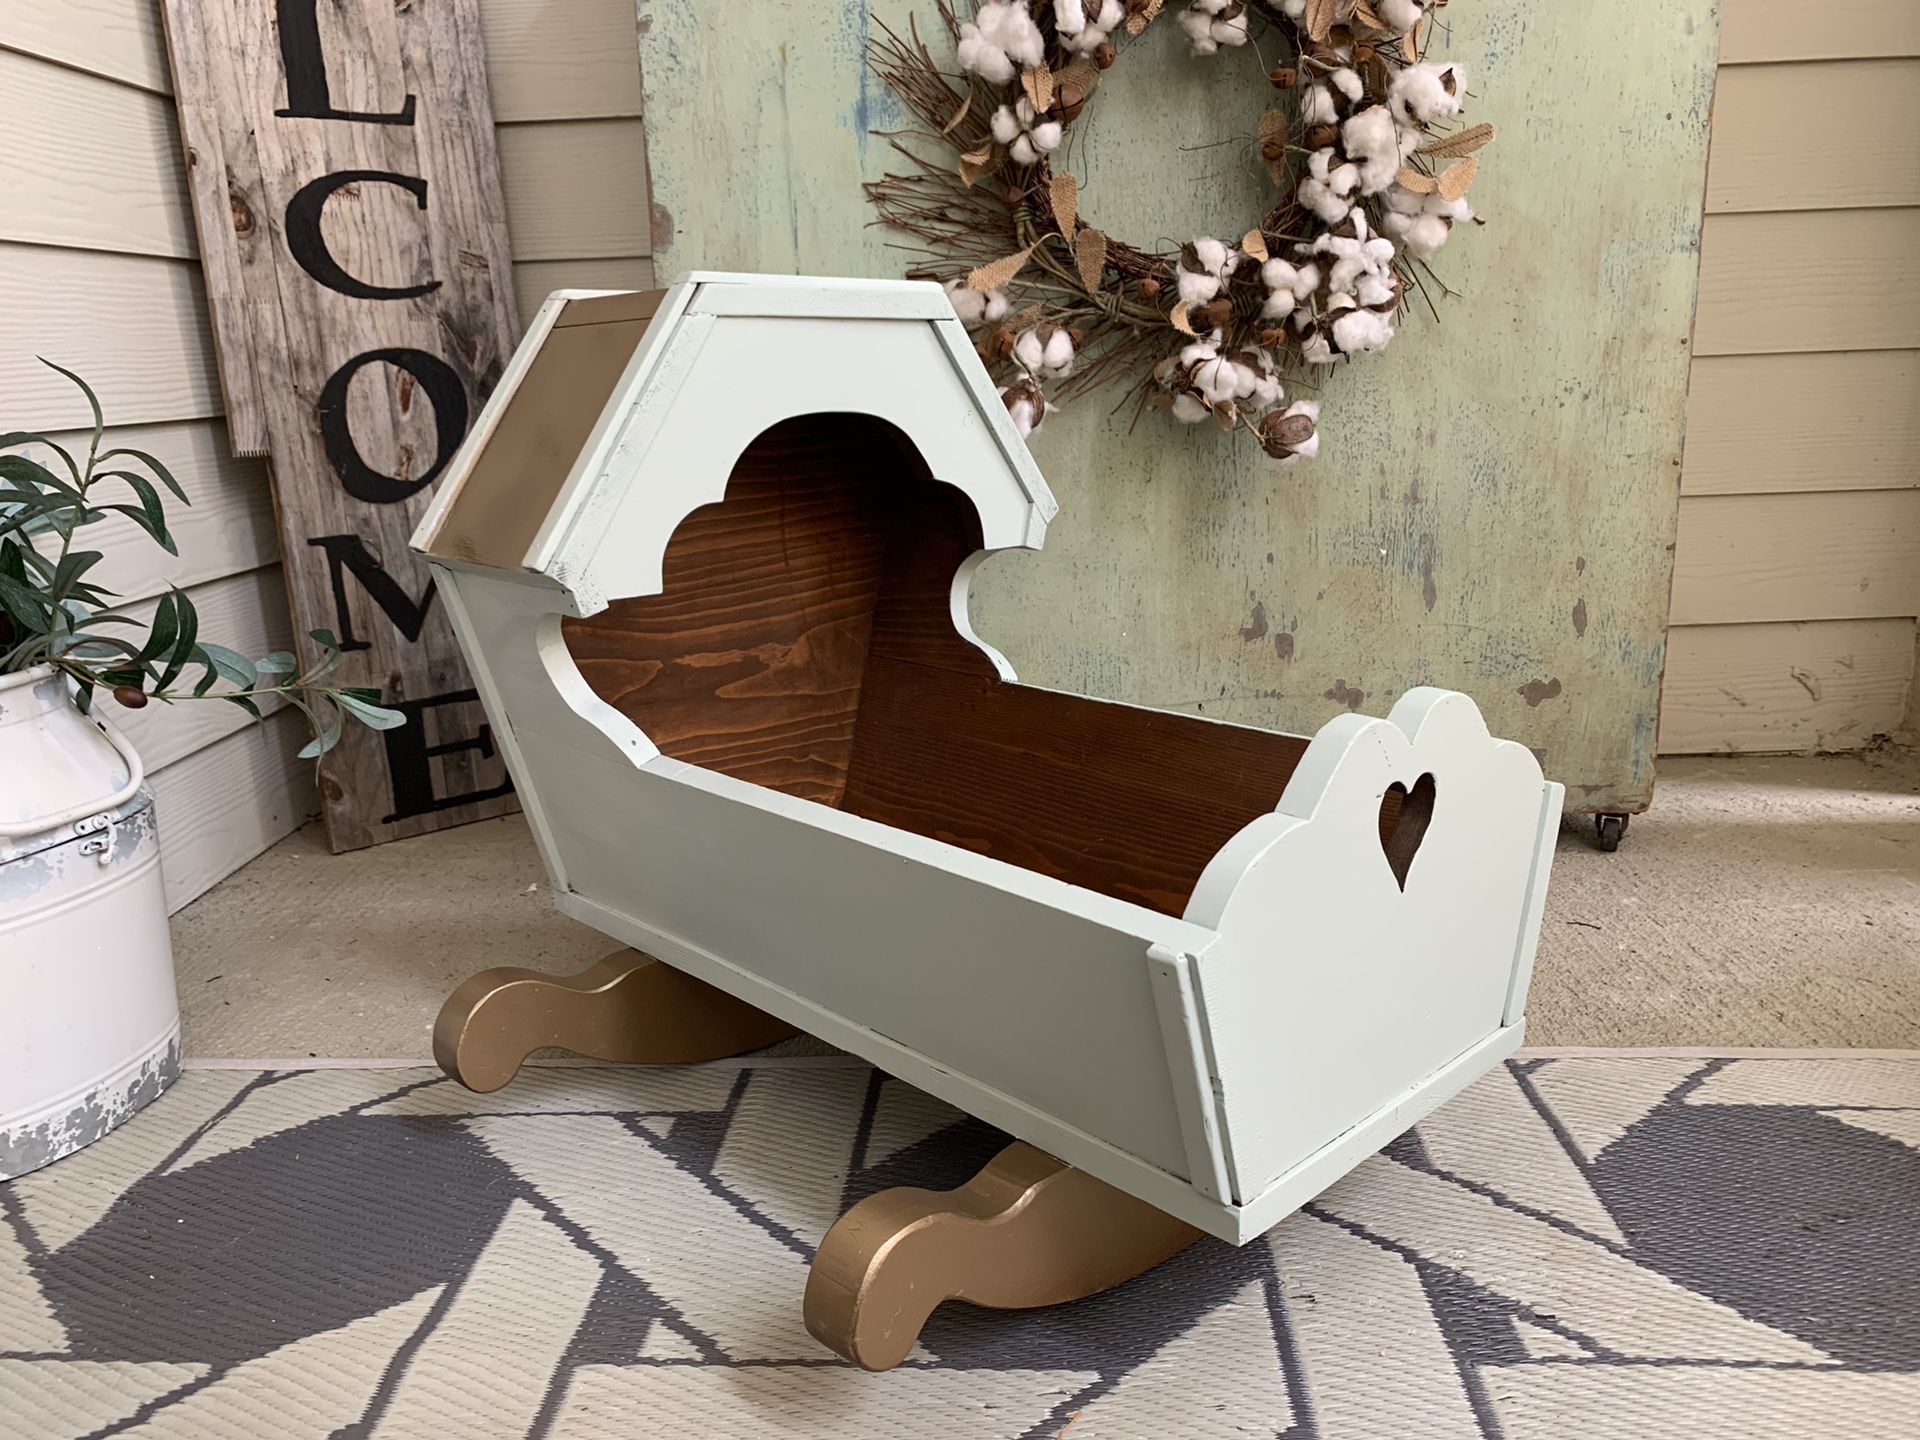 Antique baby doll cradle given a new modern look